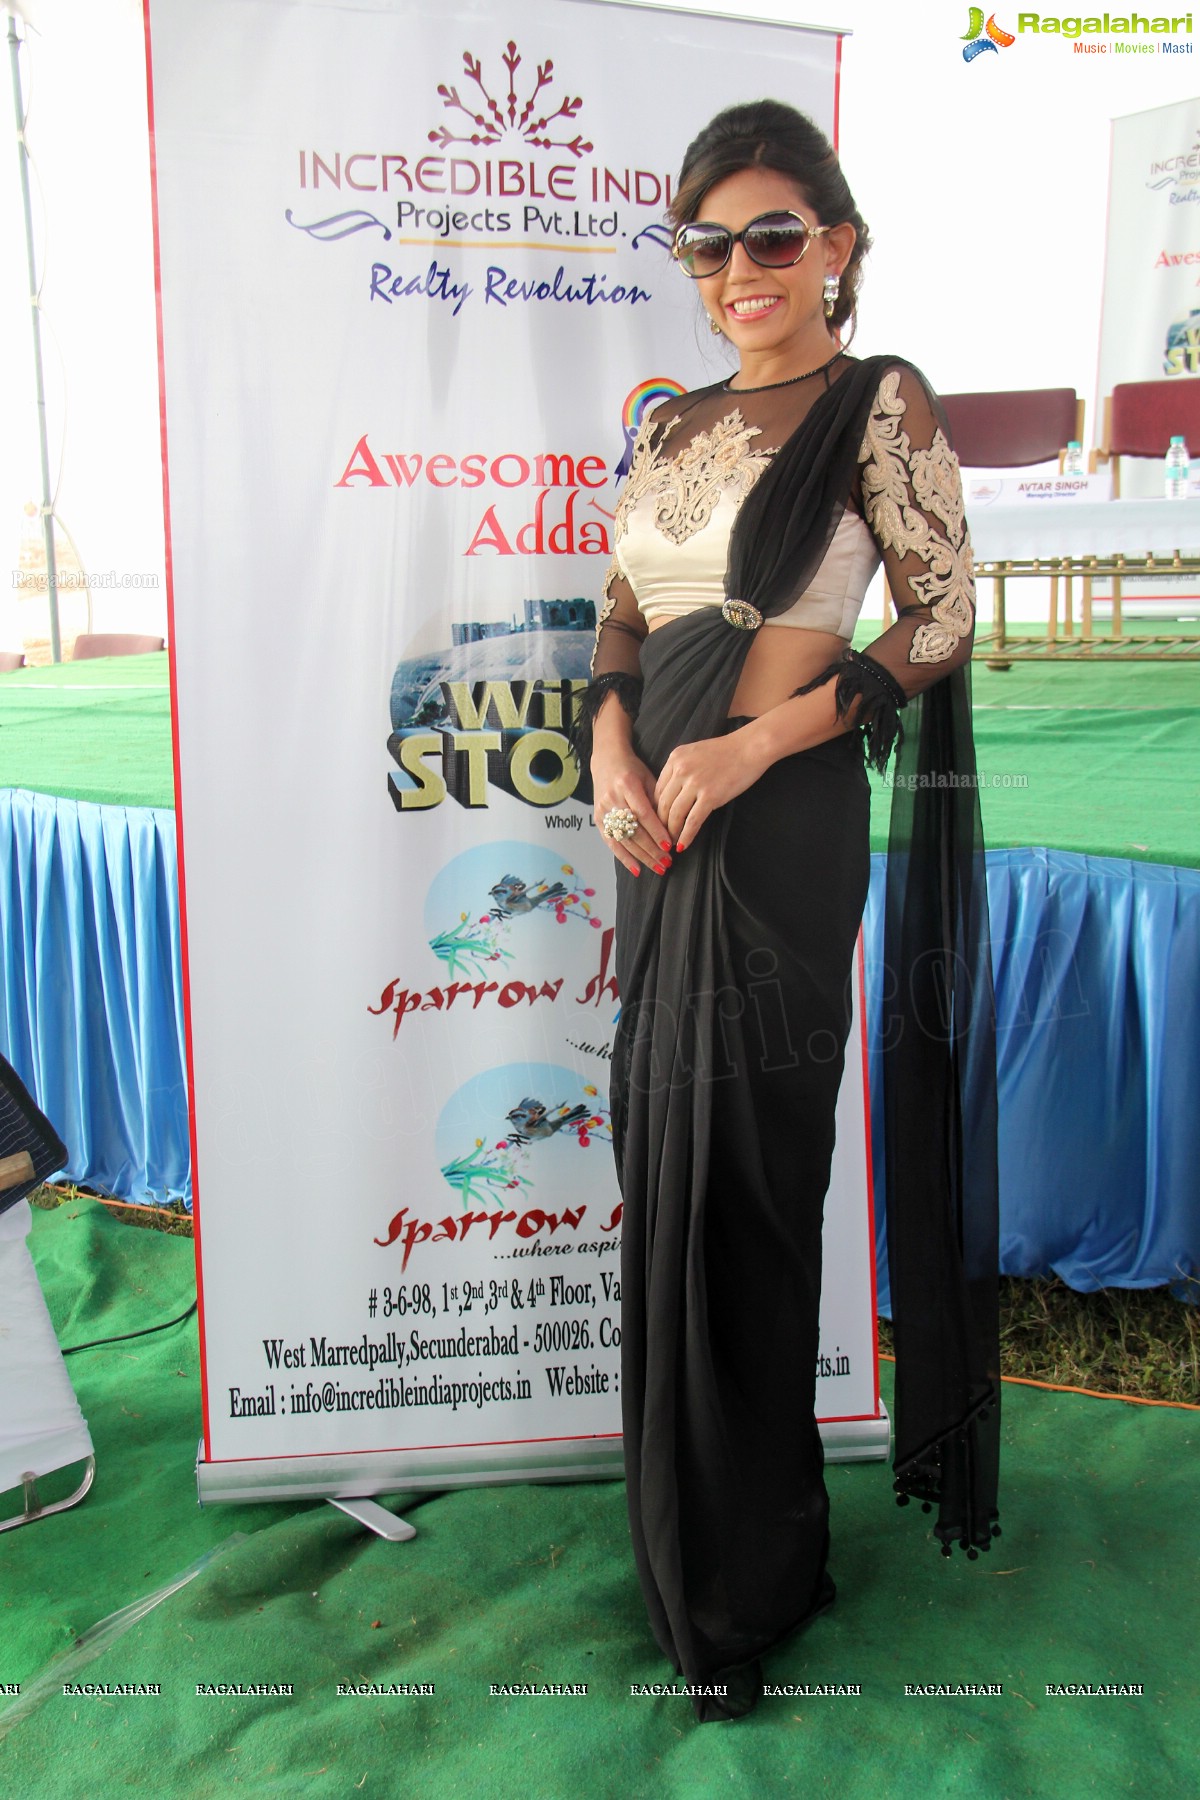 Incredible India Projects 'Awesome Adda' Launch